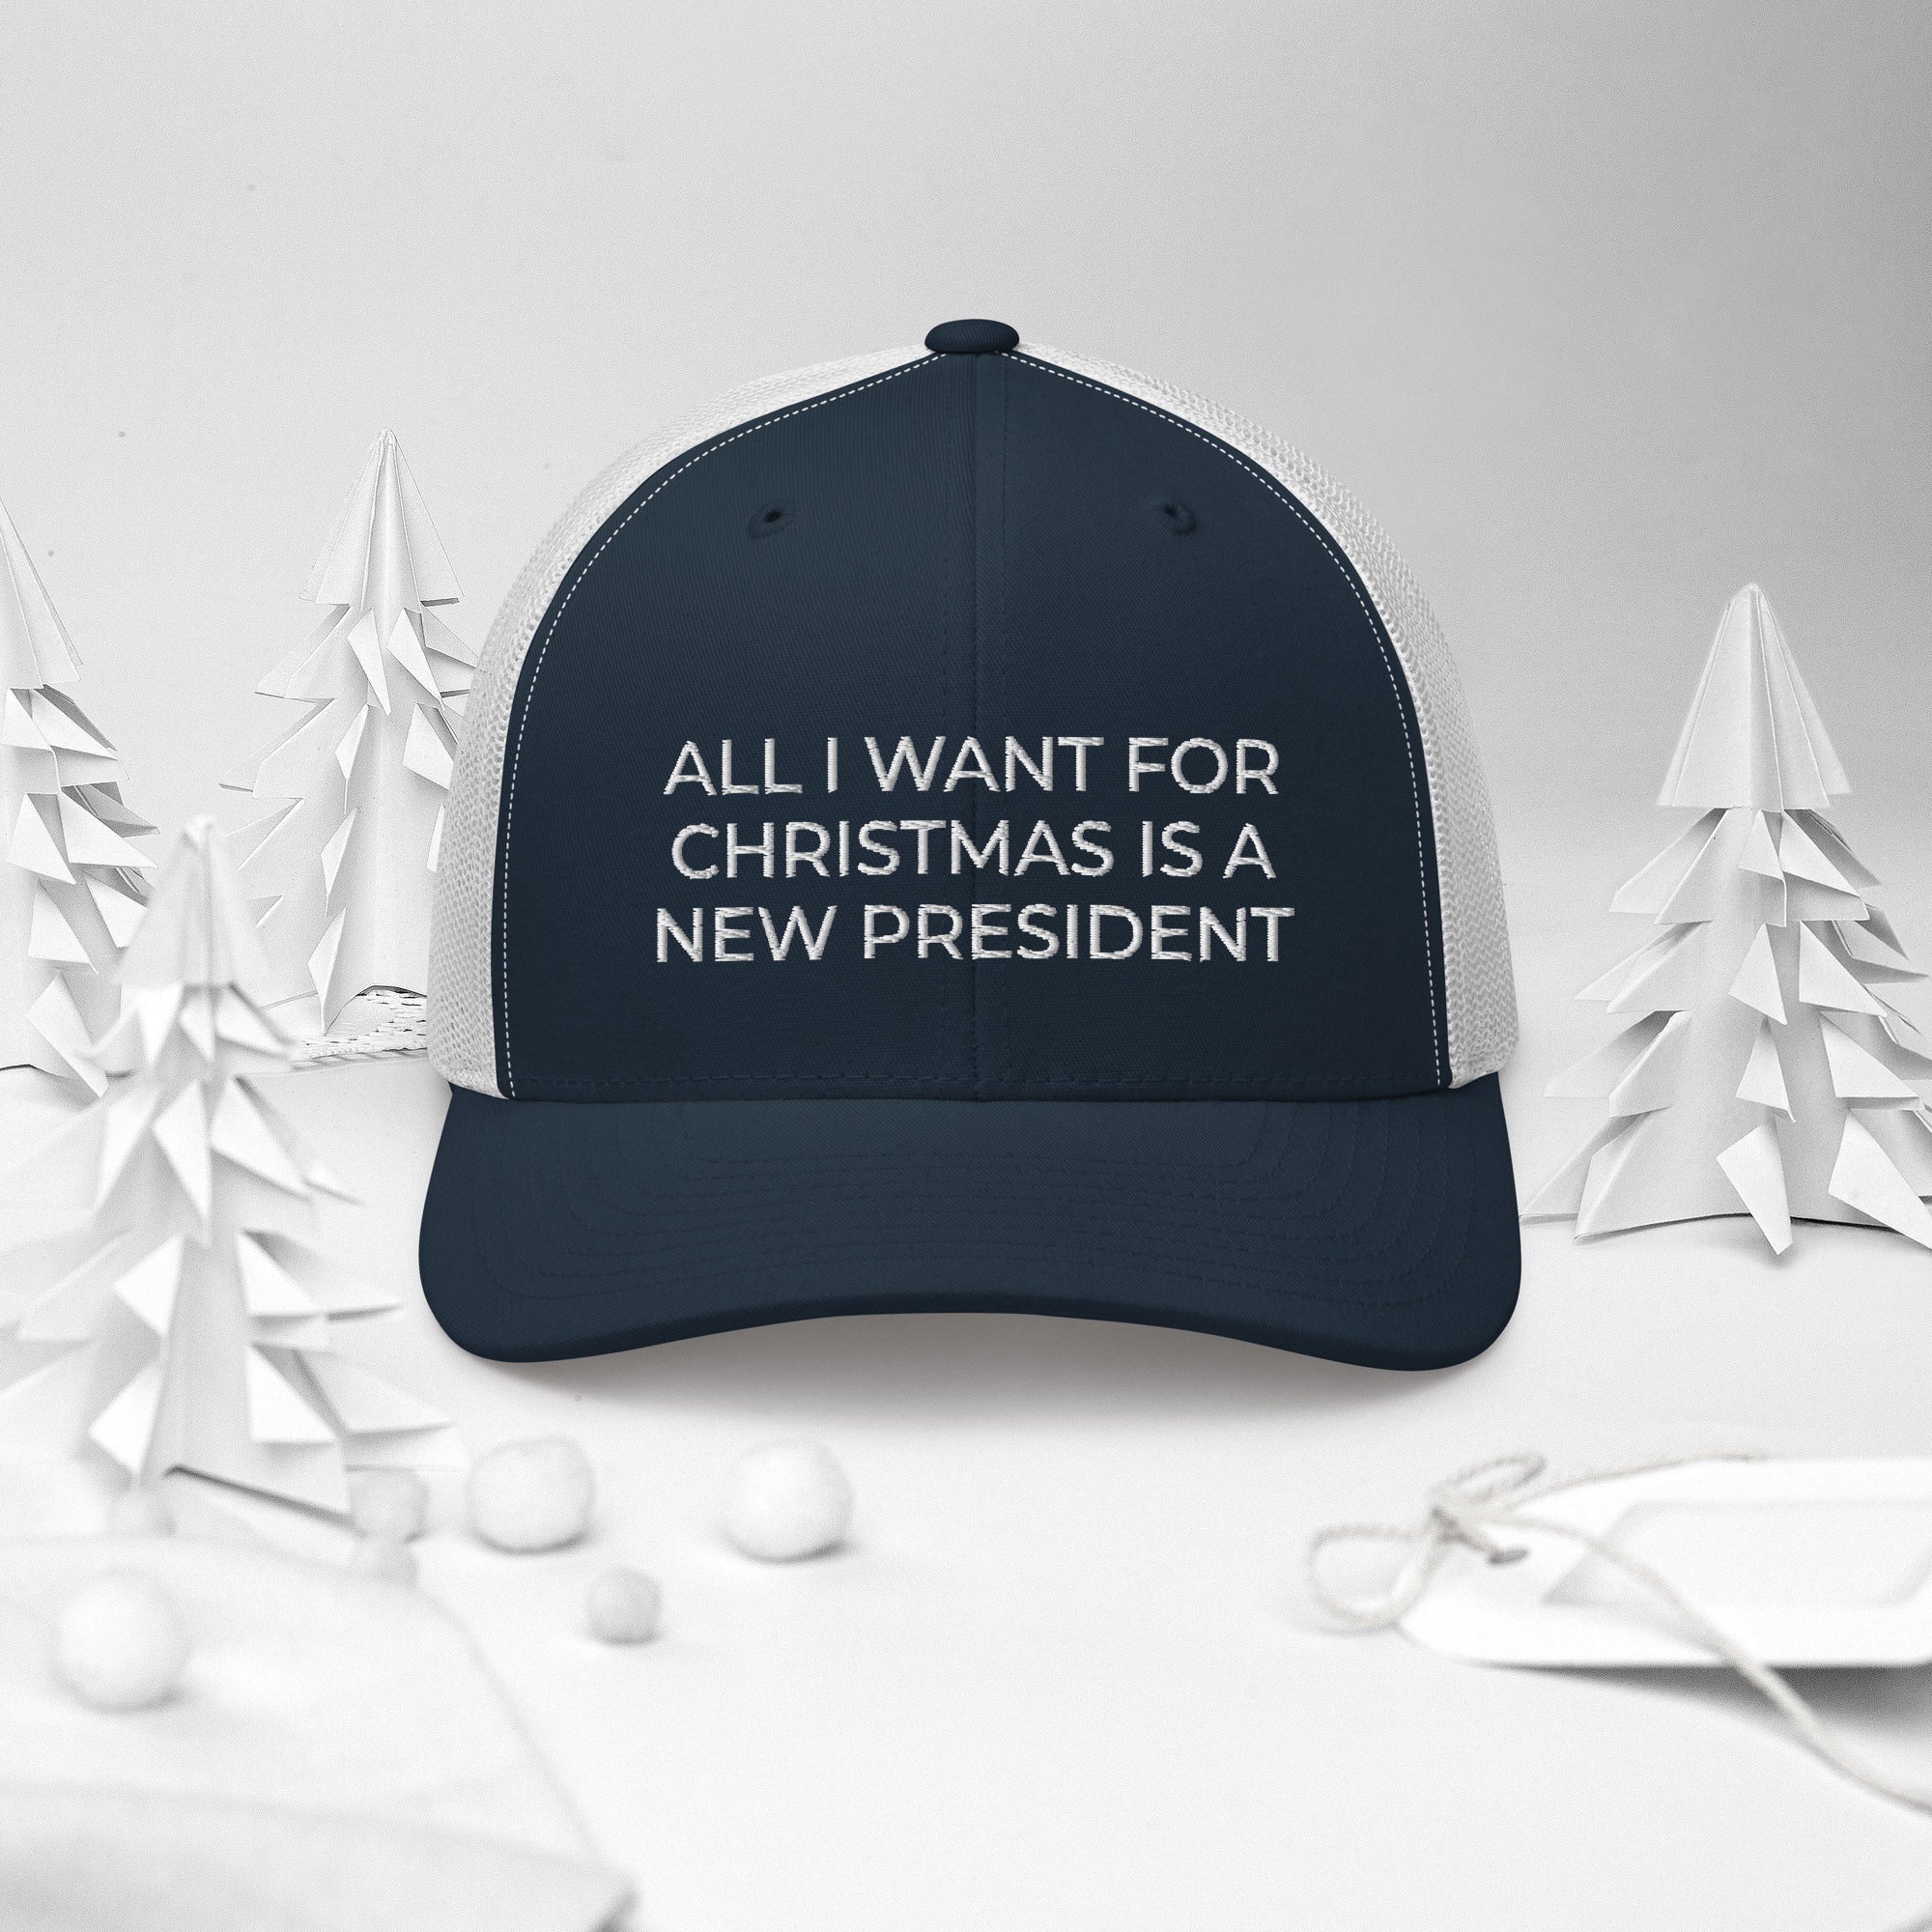 All I Want For Christmas Is A New President, FJB Christmas Trucker Hat, Anti Biden Christmas Cap, Conservative Hat, FJB Hat, Patriot Xmas - Madeinsea©